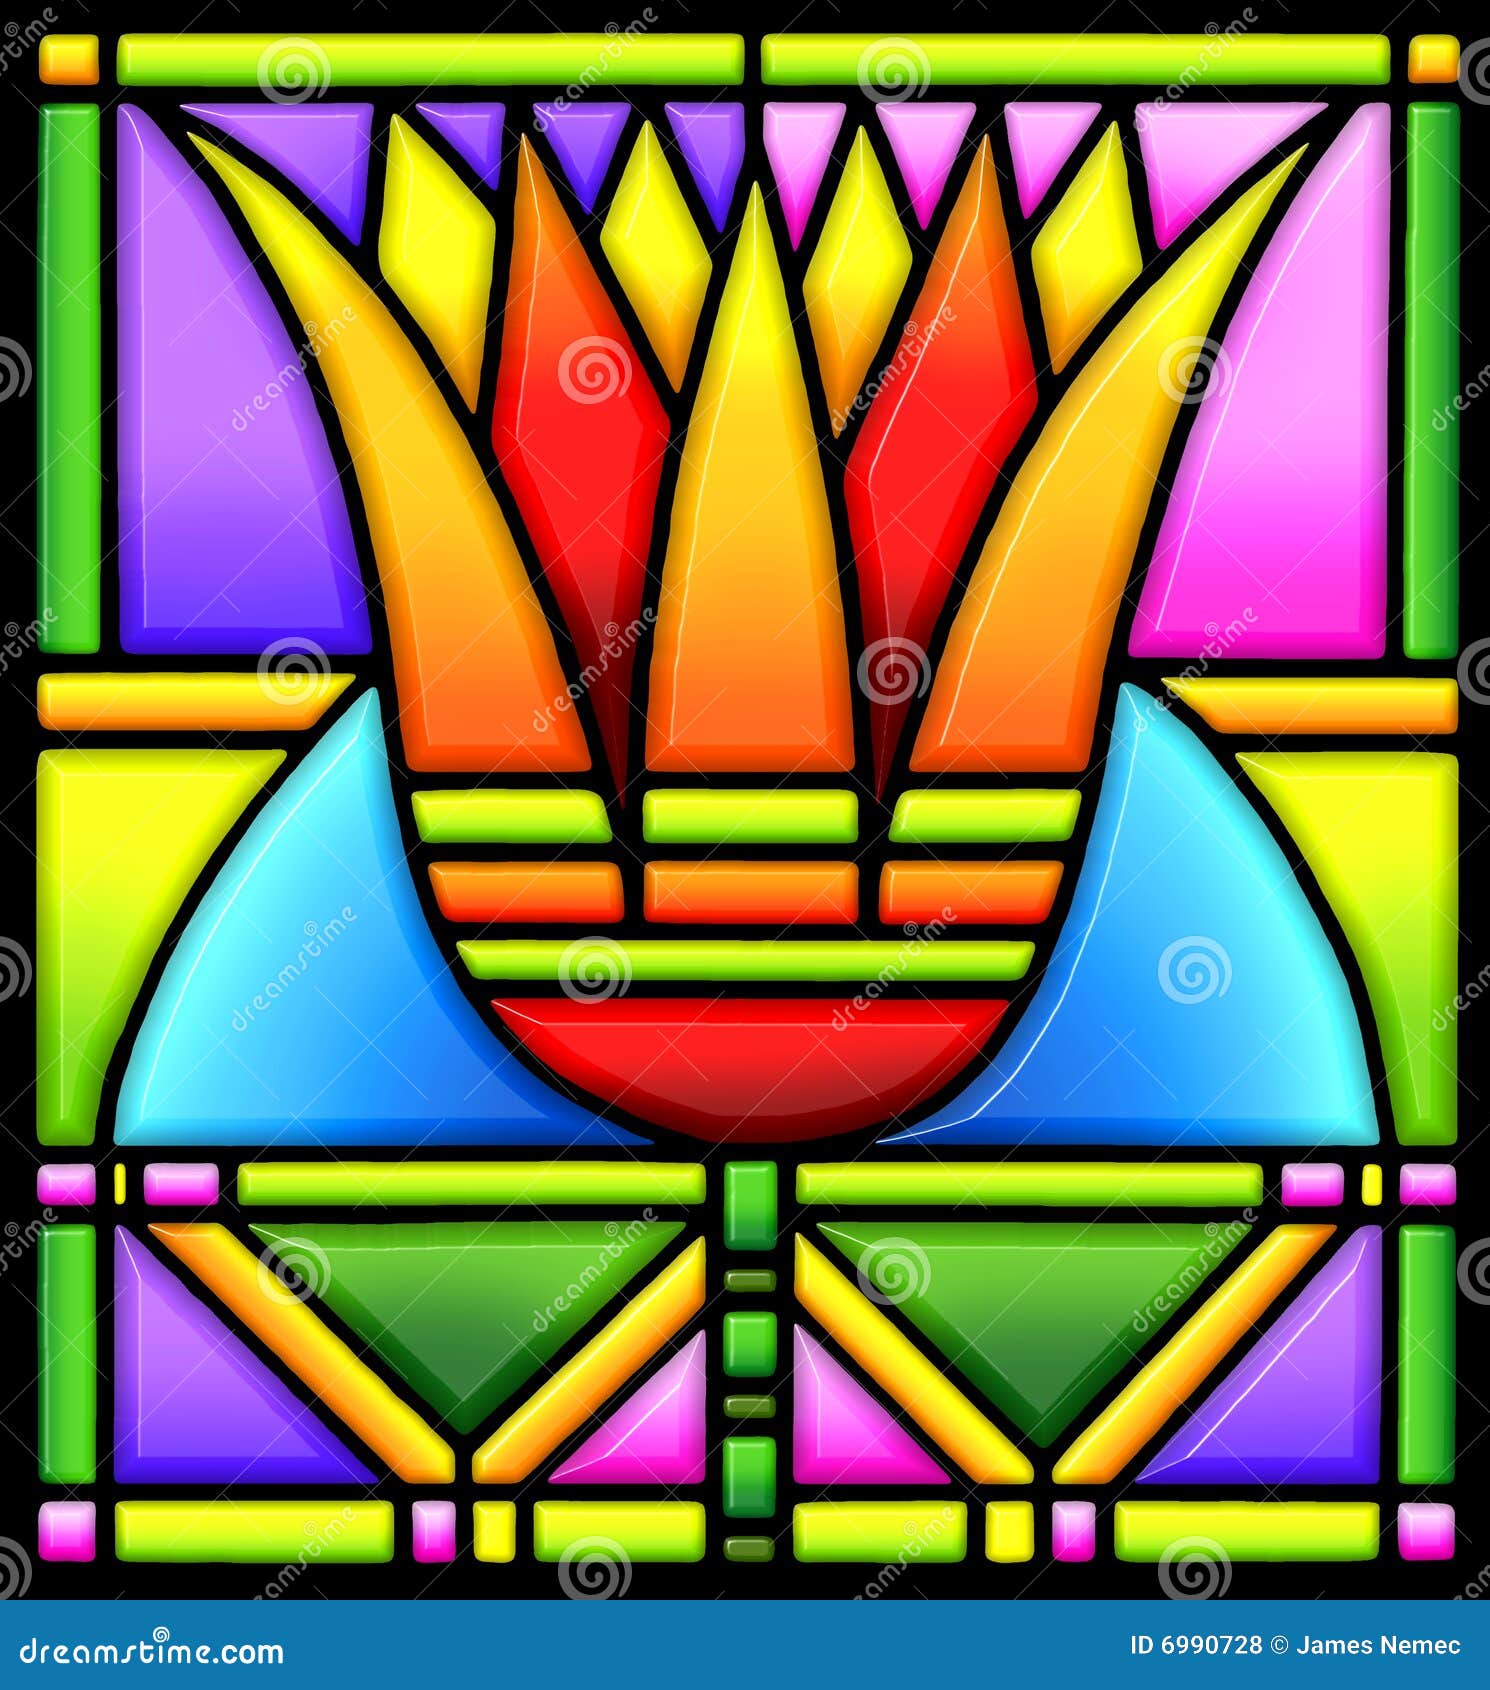 free clipart stained glass window - photo #22